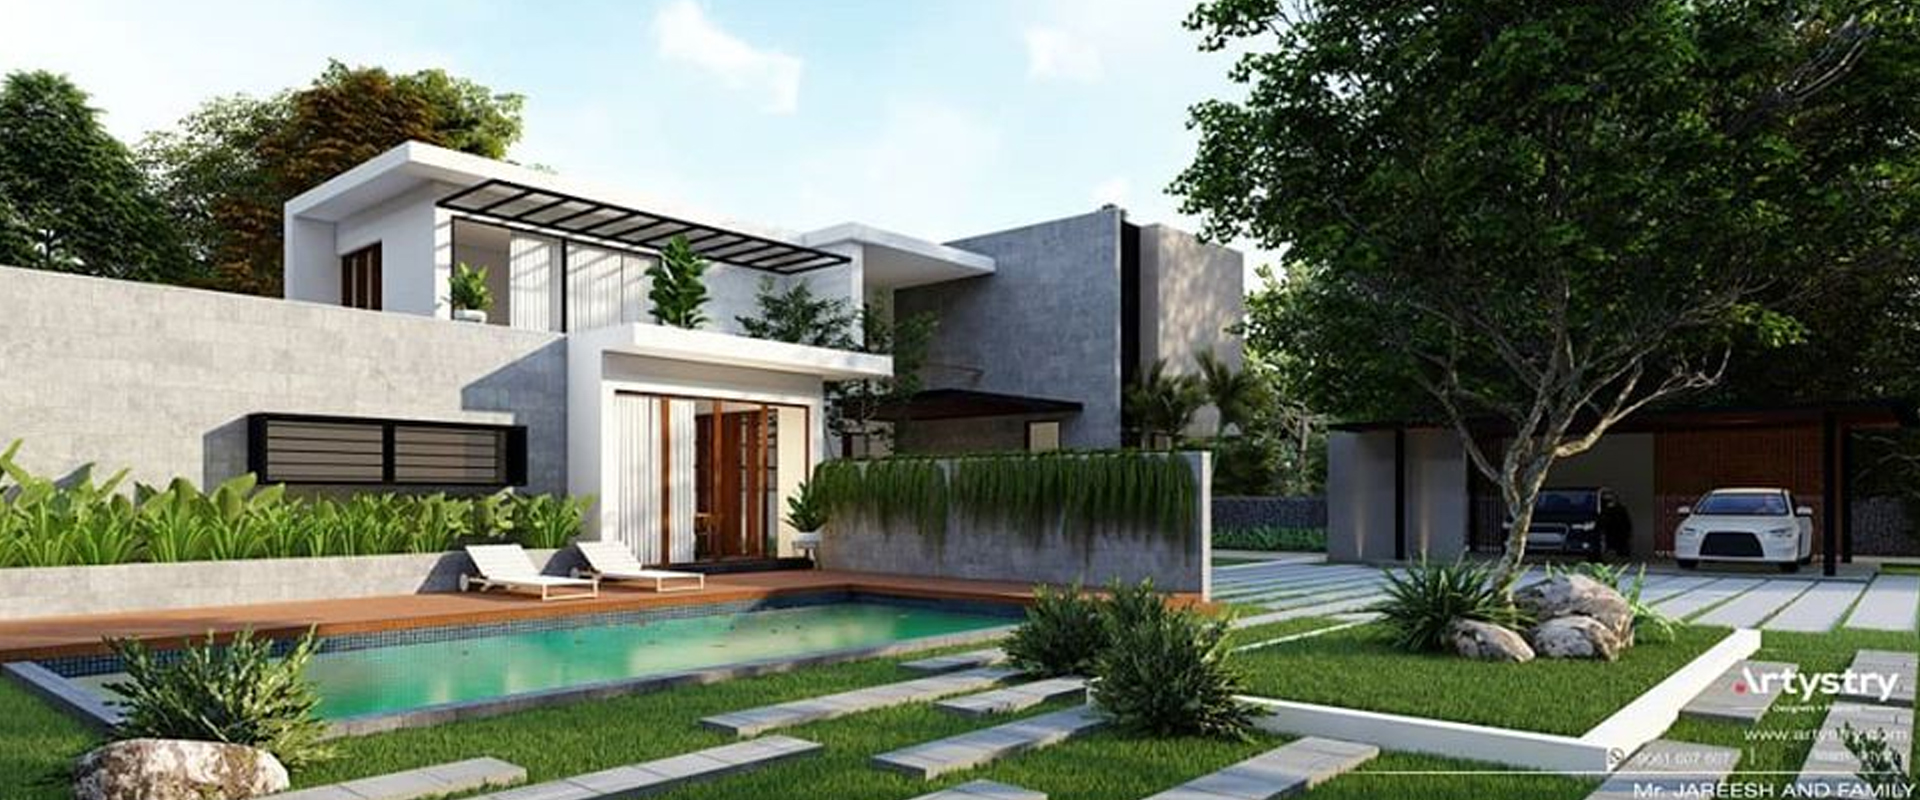 Residential project at calicut